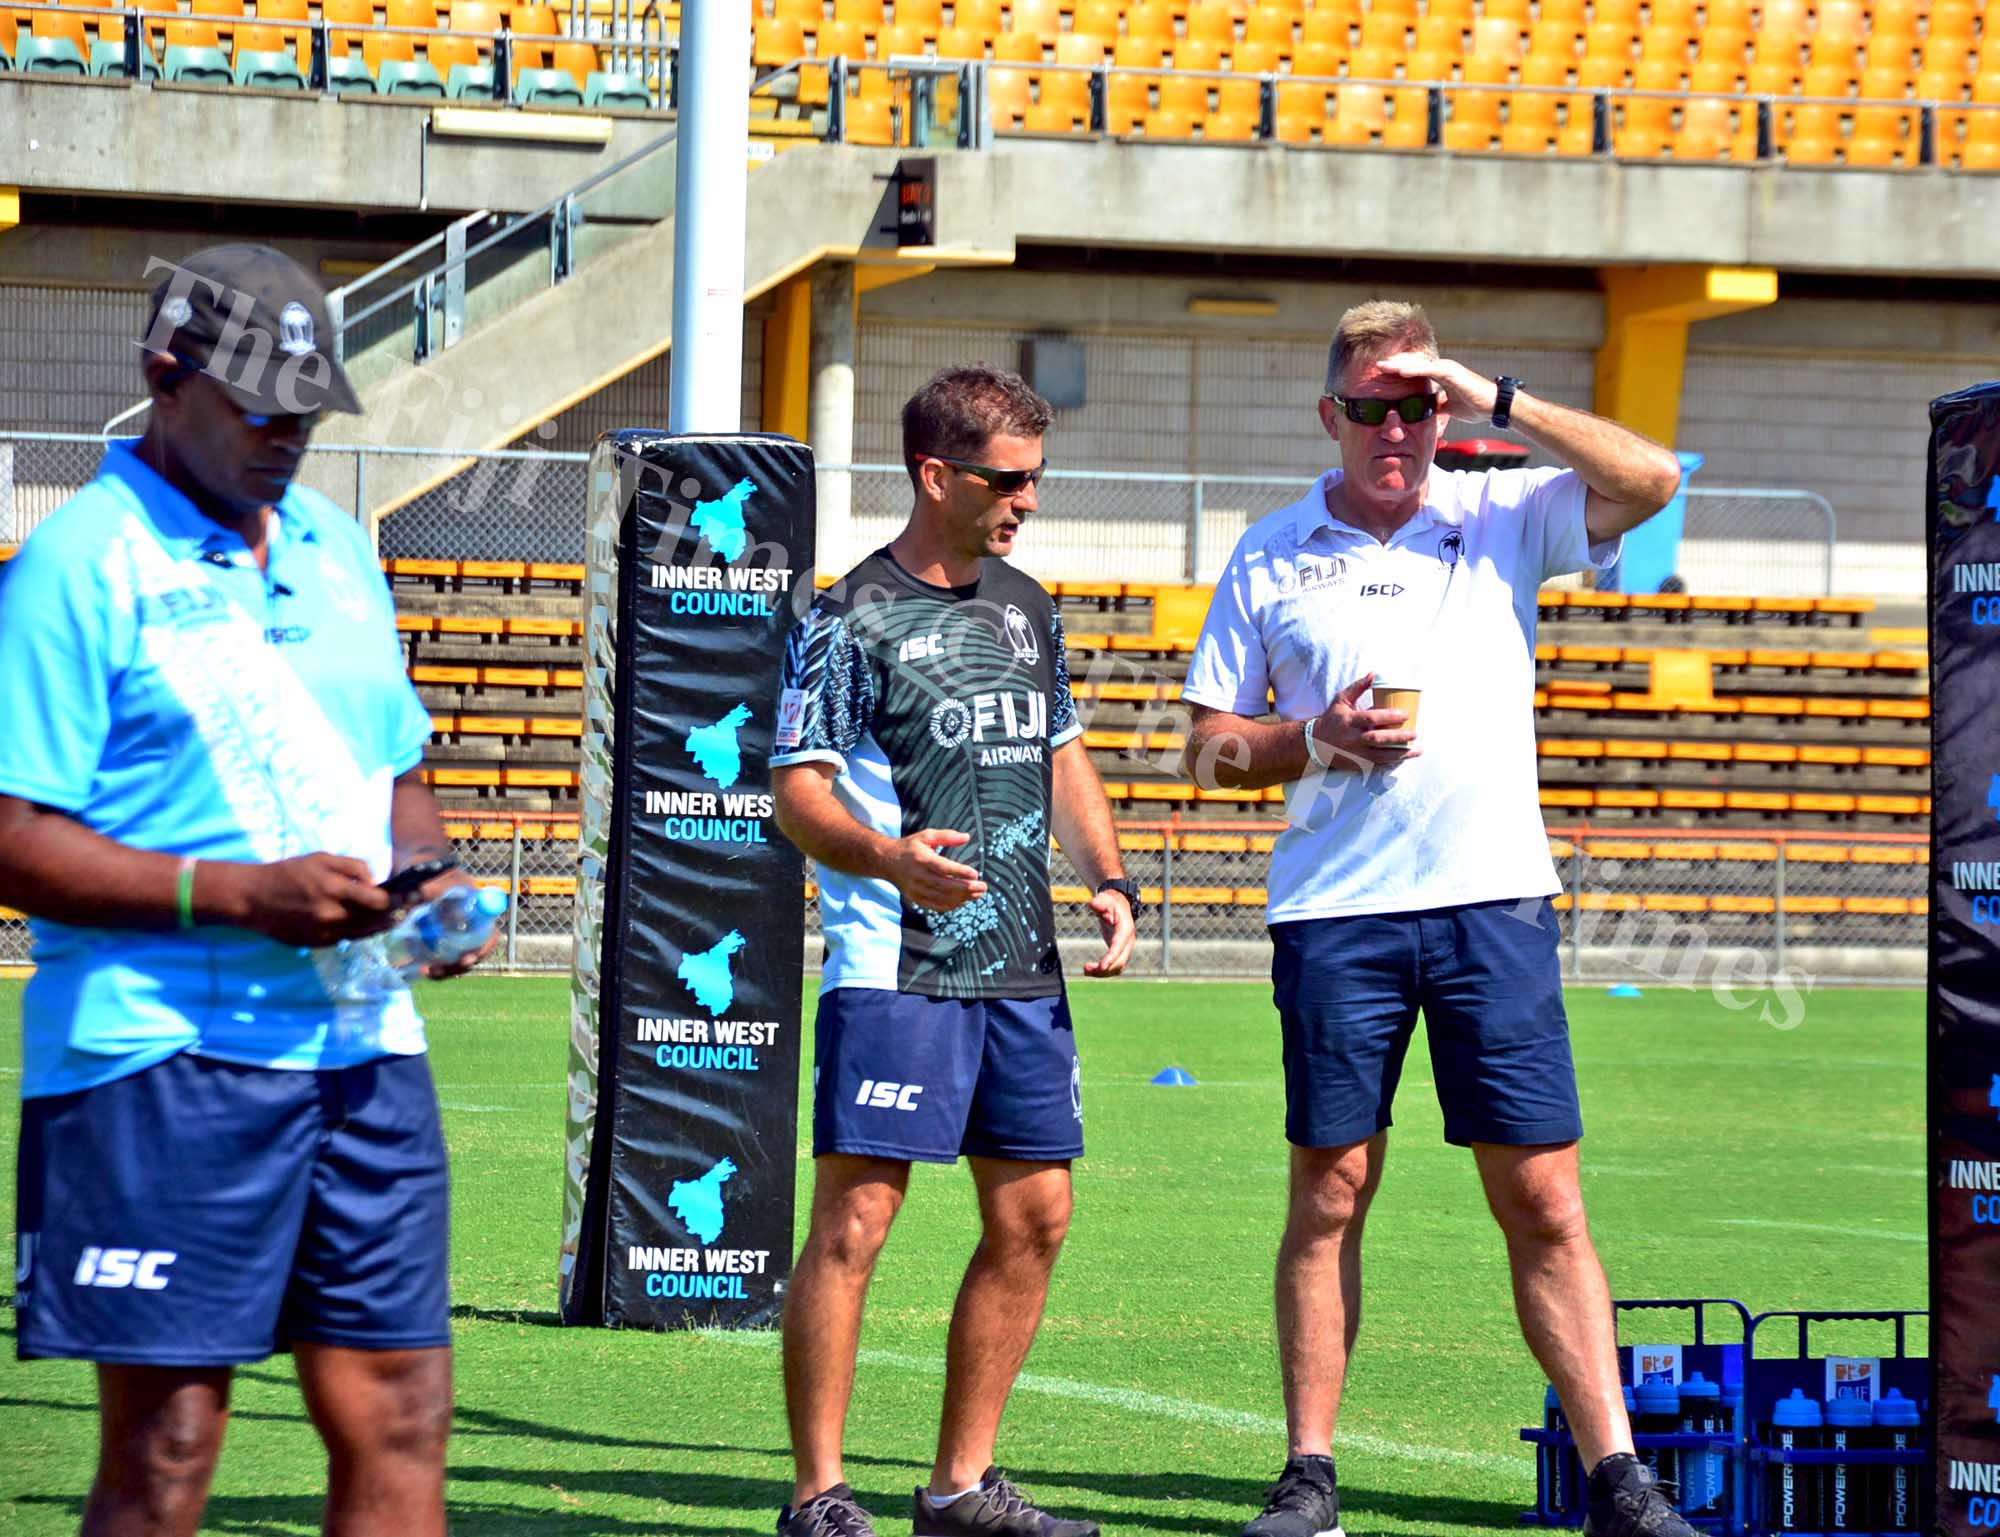 Fiji Airways Flying Fijians coach John McKee having discussions with Fiji Airways 7s coach Gareth Baber during their team training at the Leichhardt Oval ground in Sydney, Australia on Wednesday, January 24, 2018. Picture: JONACANI LALAKOBAU